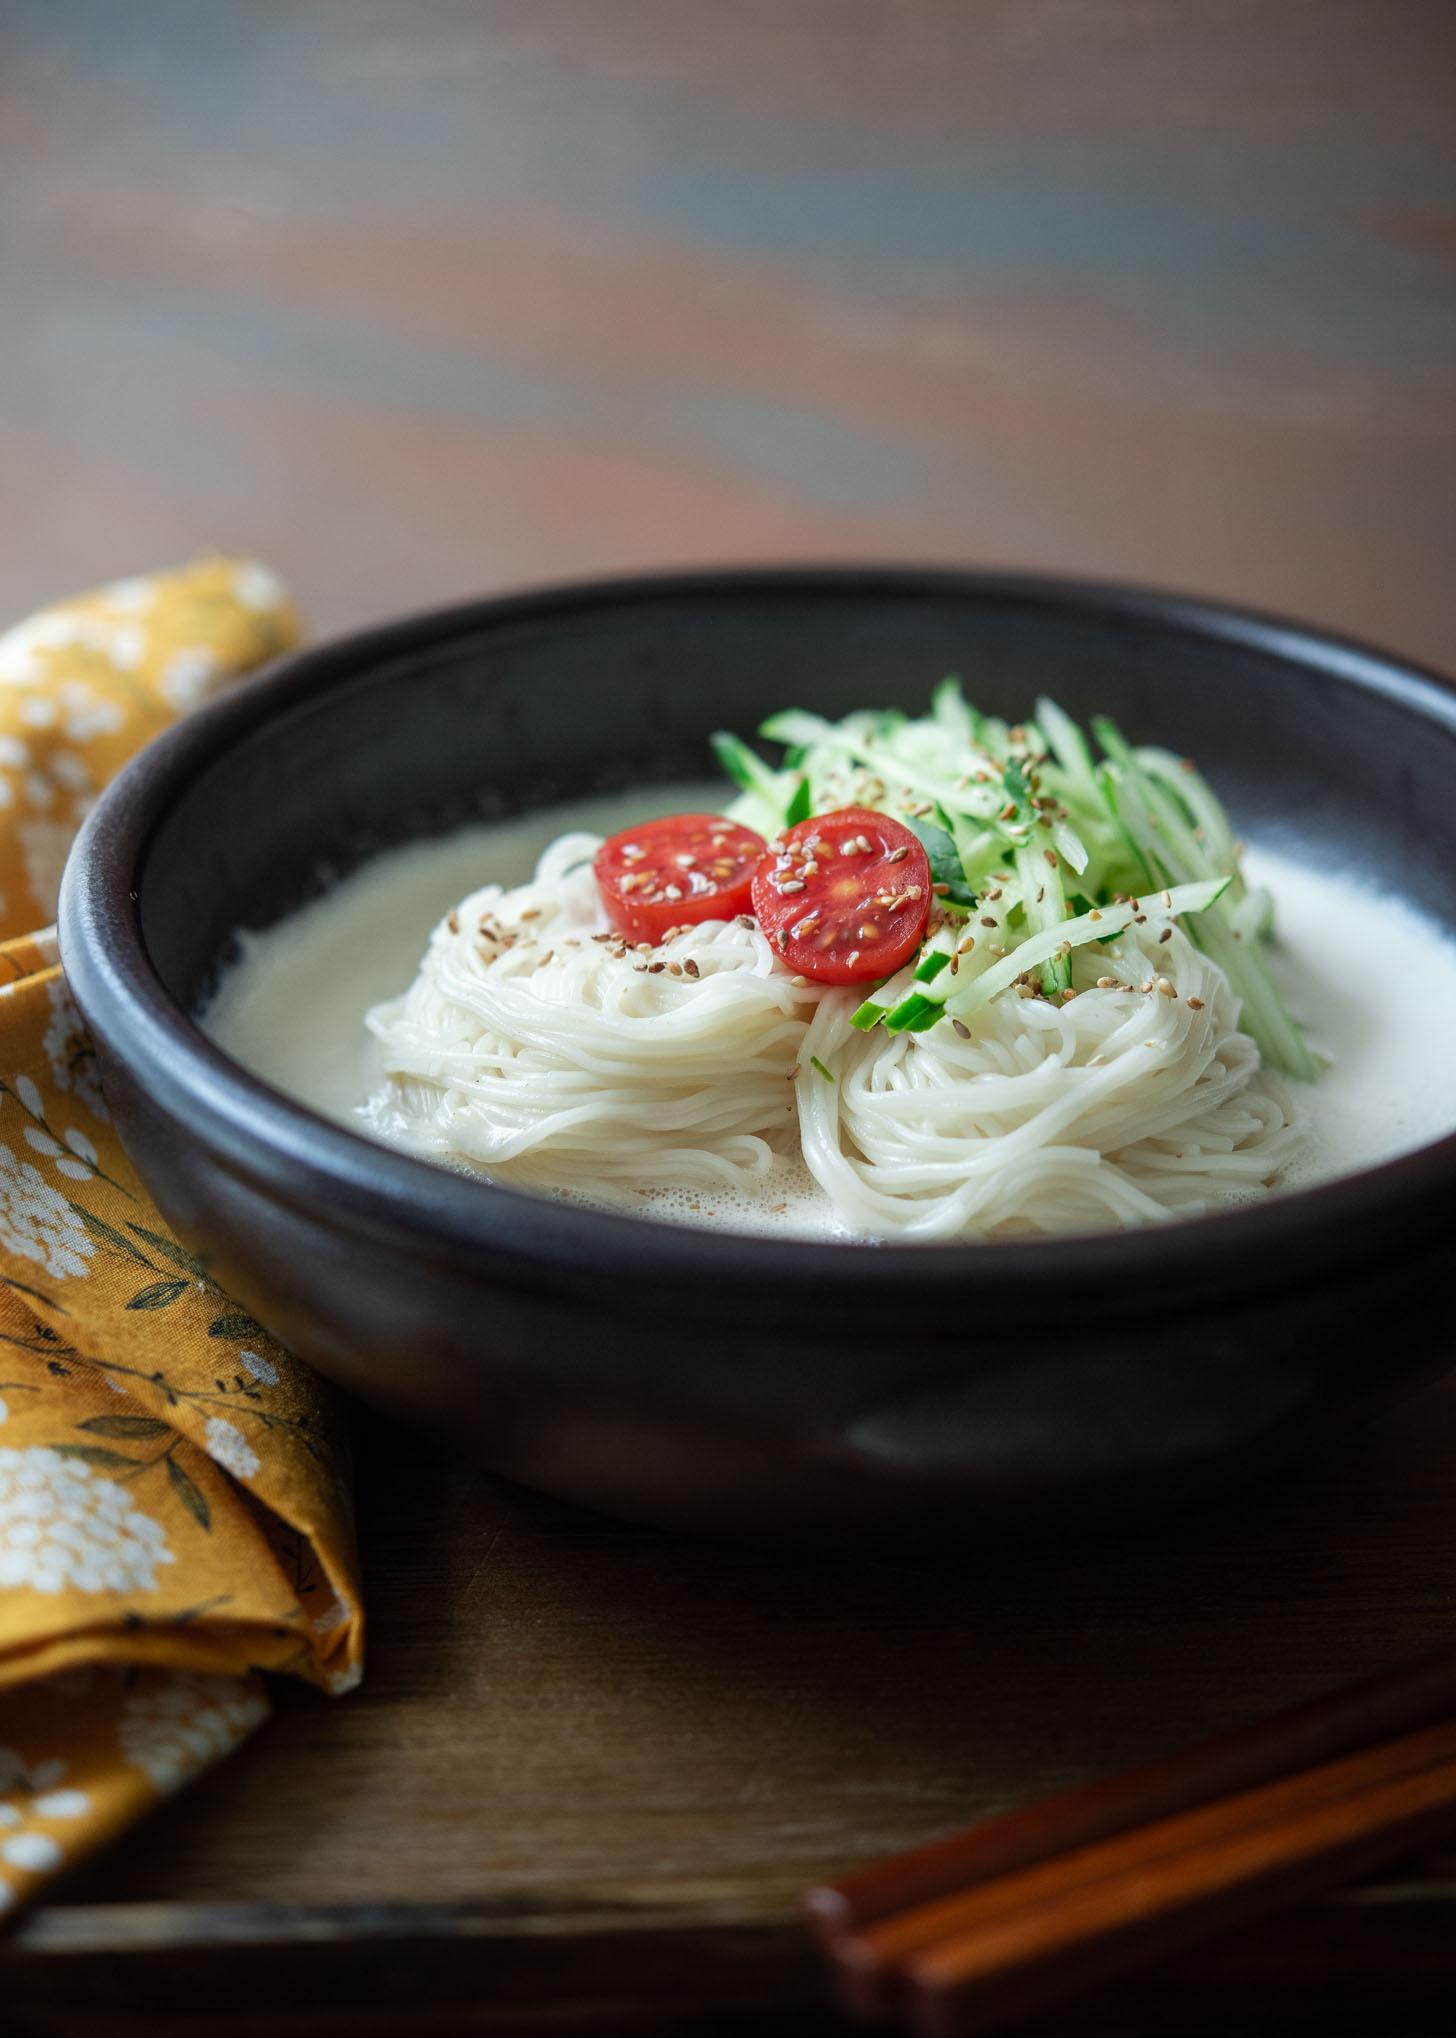 Korean cold soy milk soup noodles called kongguksu served in a bow with garnishes.